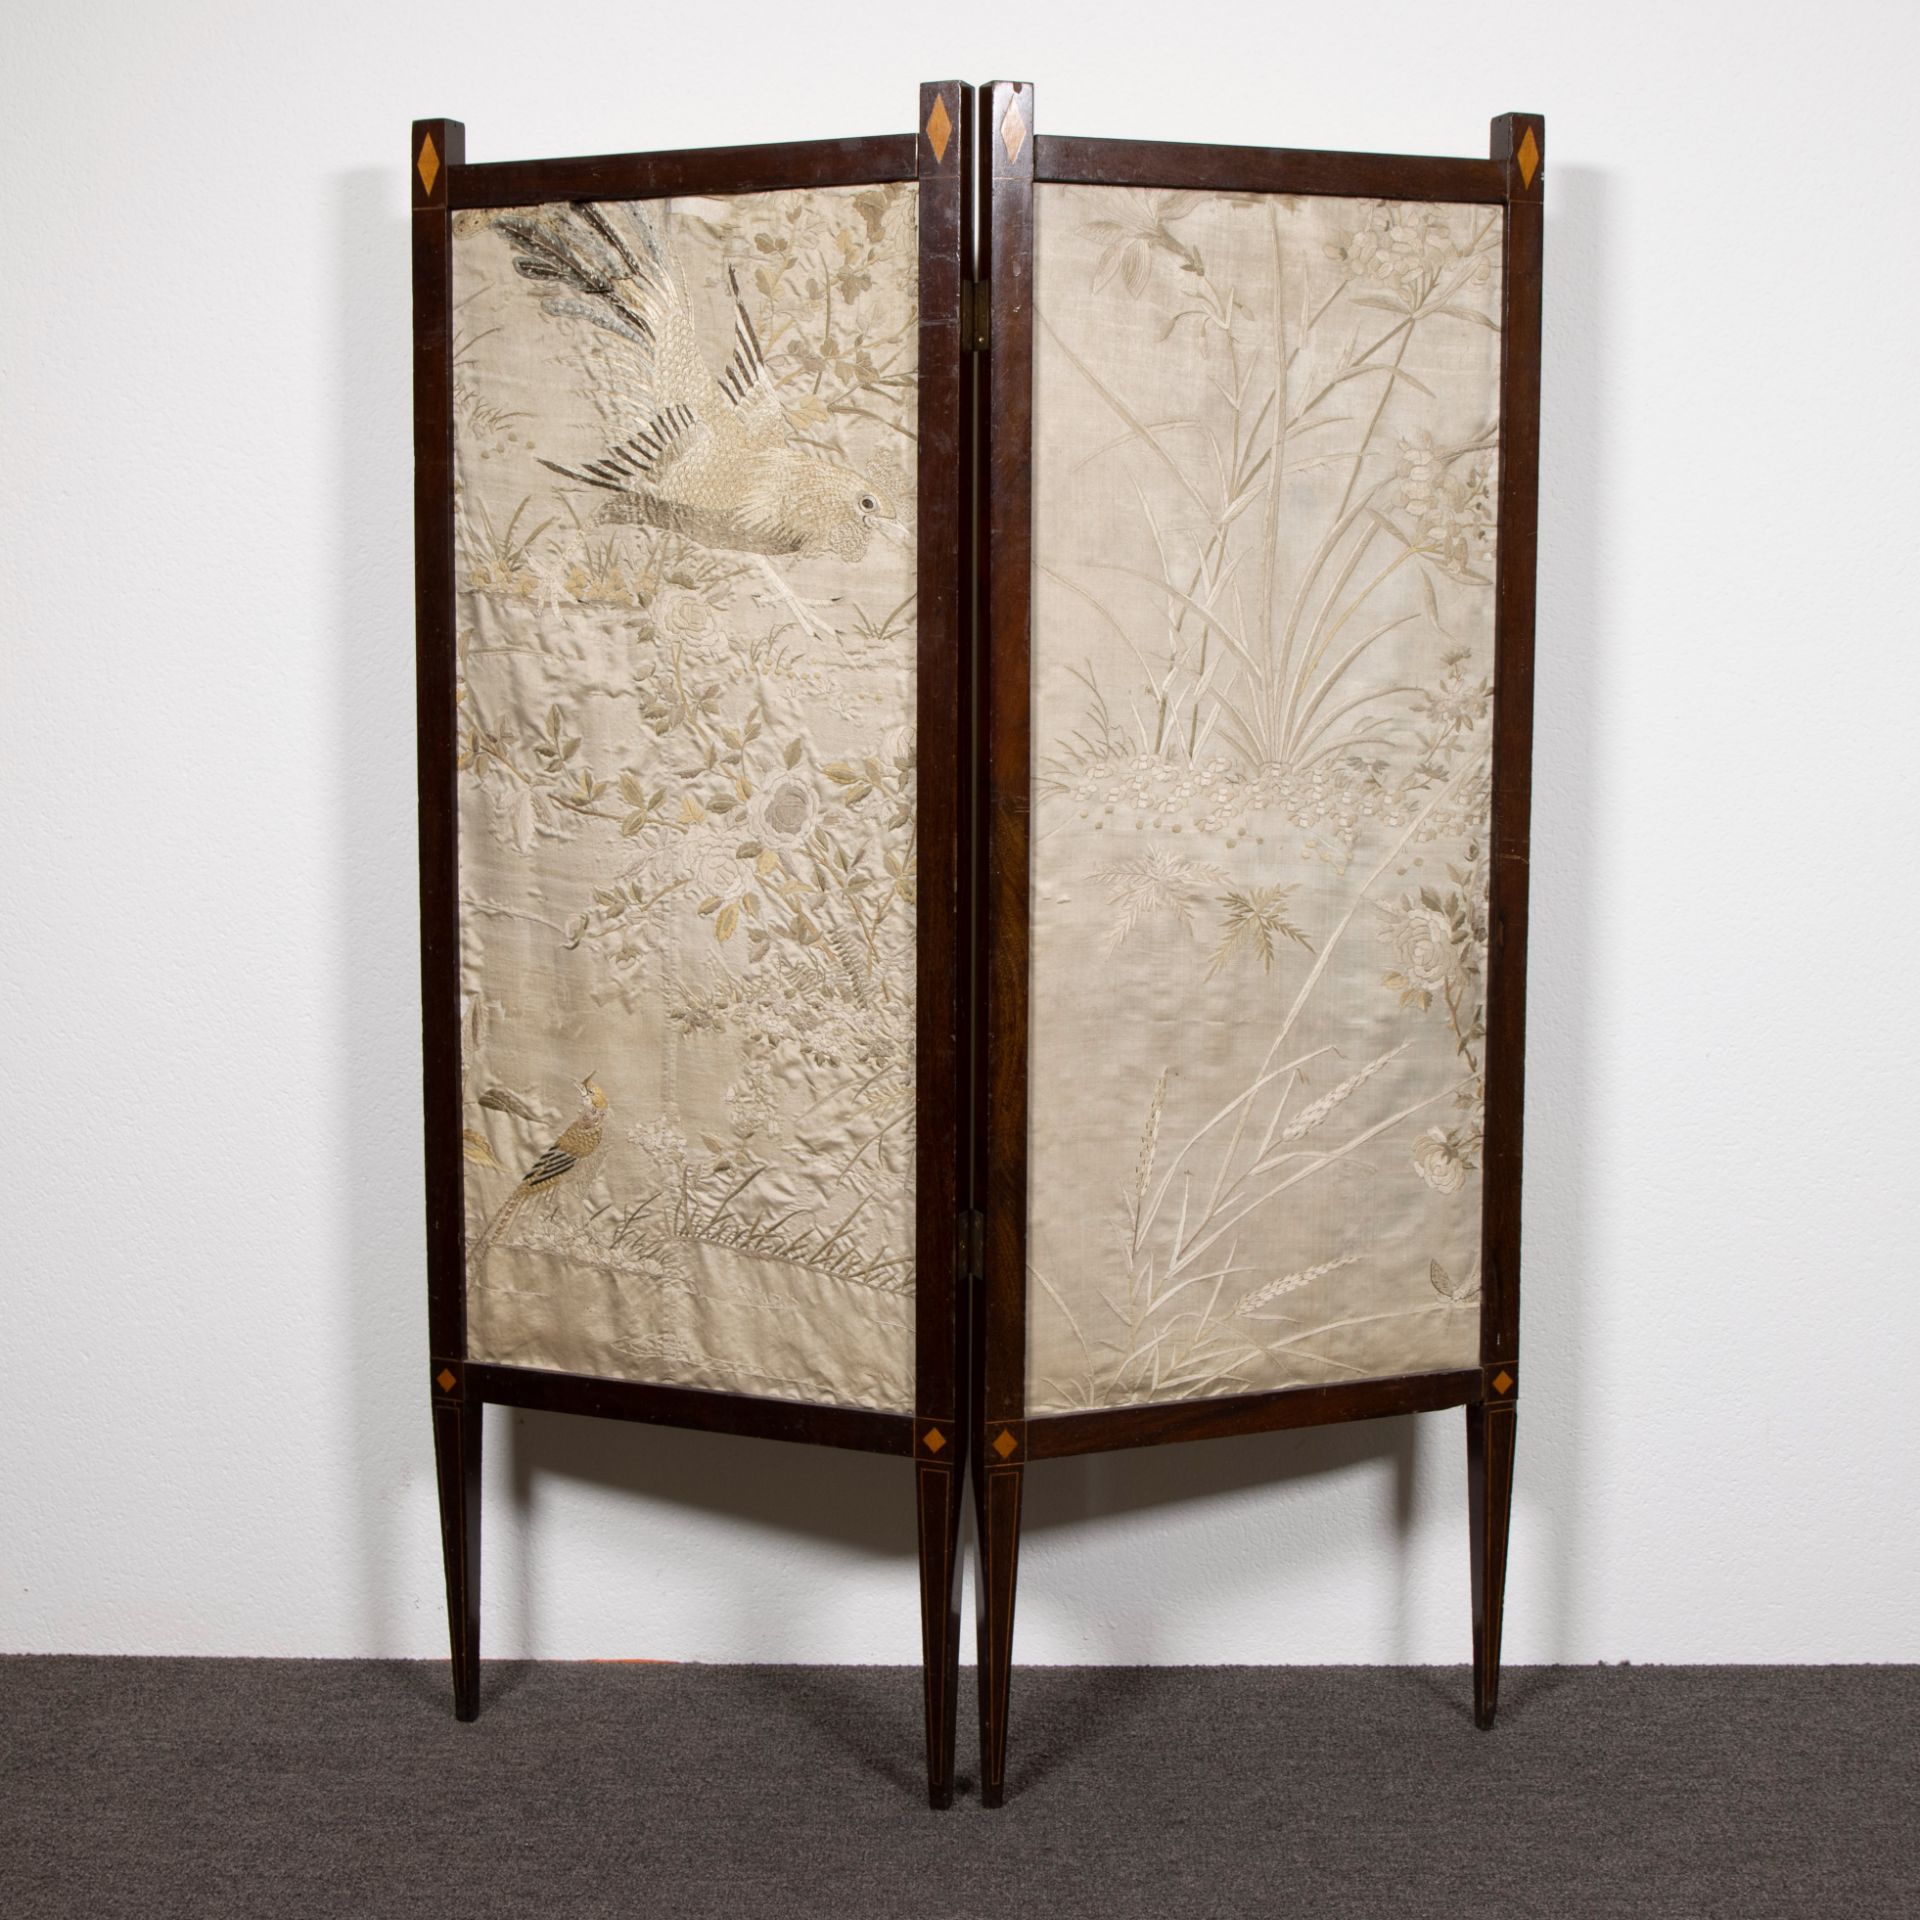 Chinese silk folding screen with floral and peacock decor 18th century in French wooden frame - Image 2 of 2